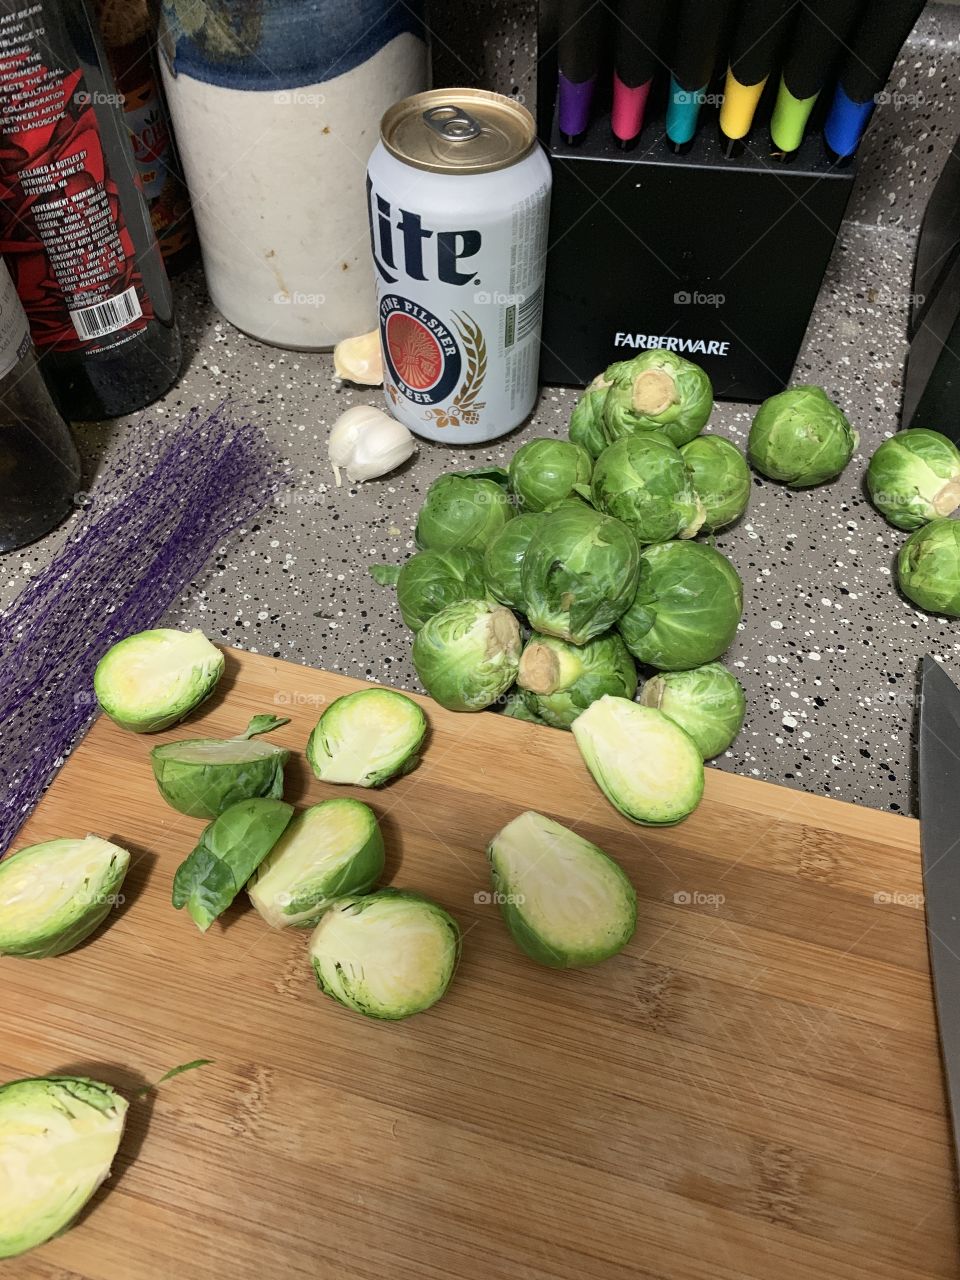 Brussels sprouts 